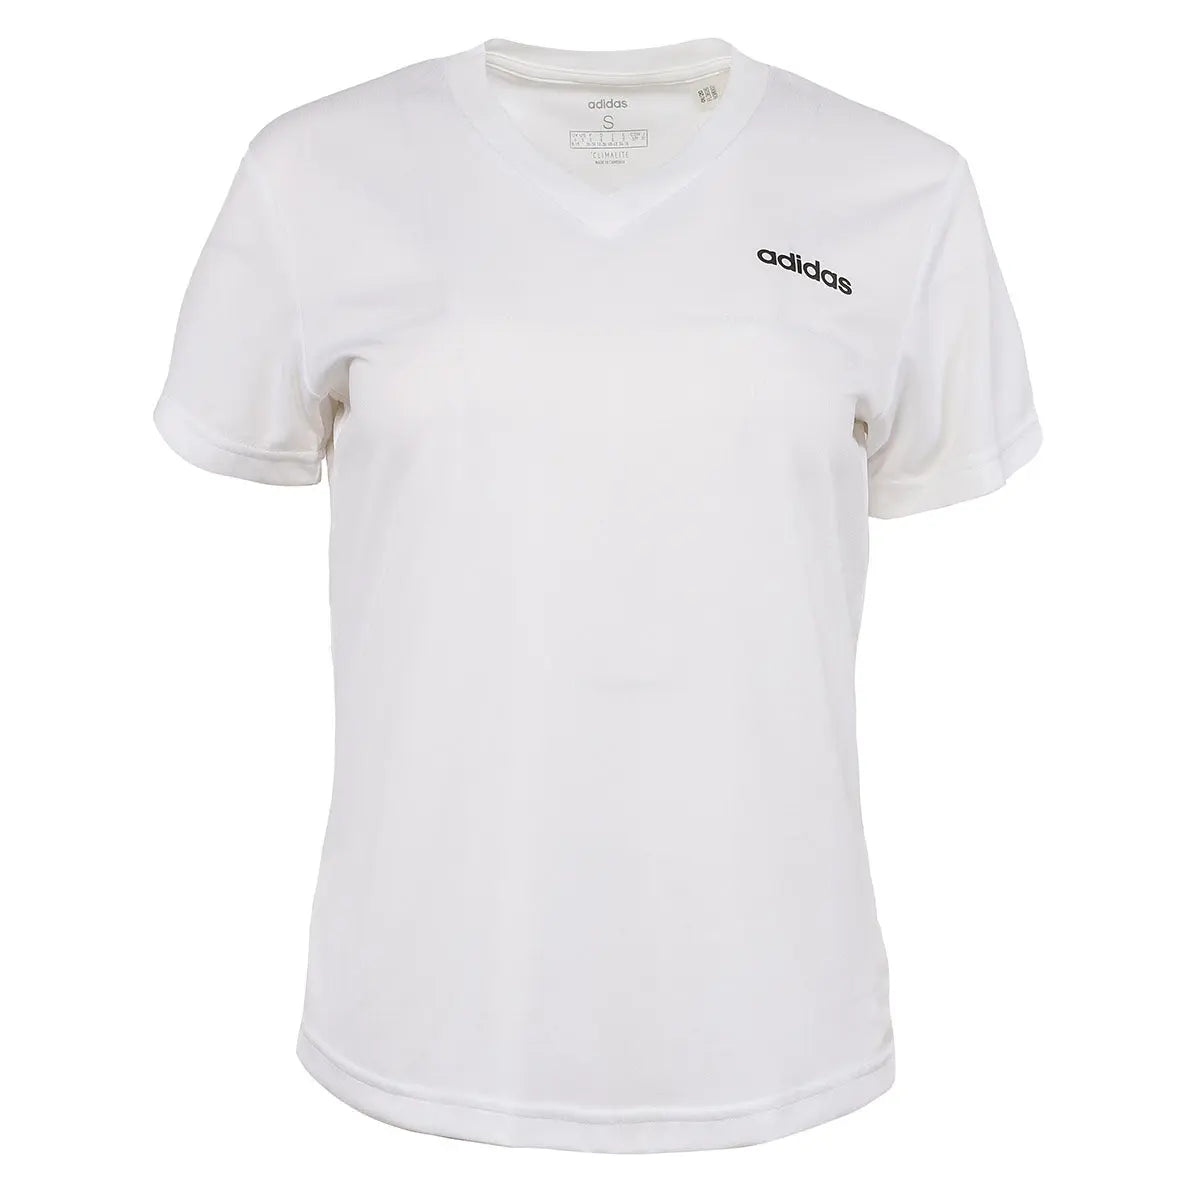 adidas Women's Designed 2 Move Solid Tee